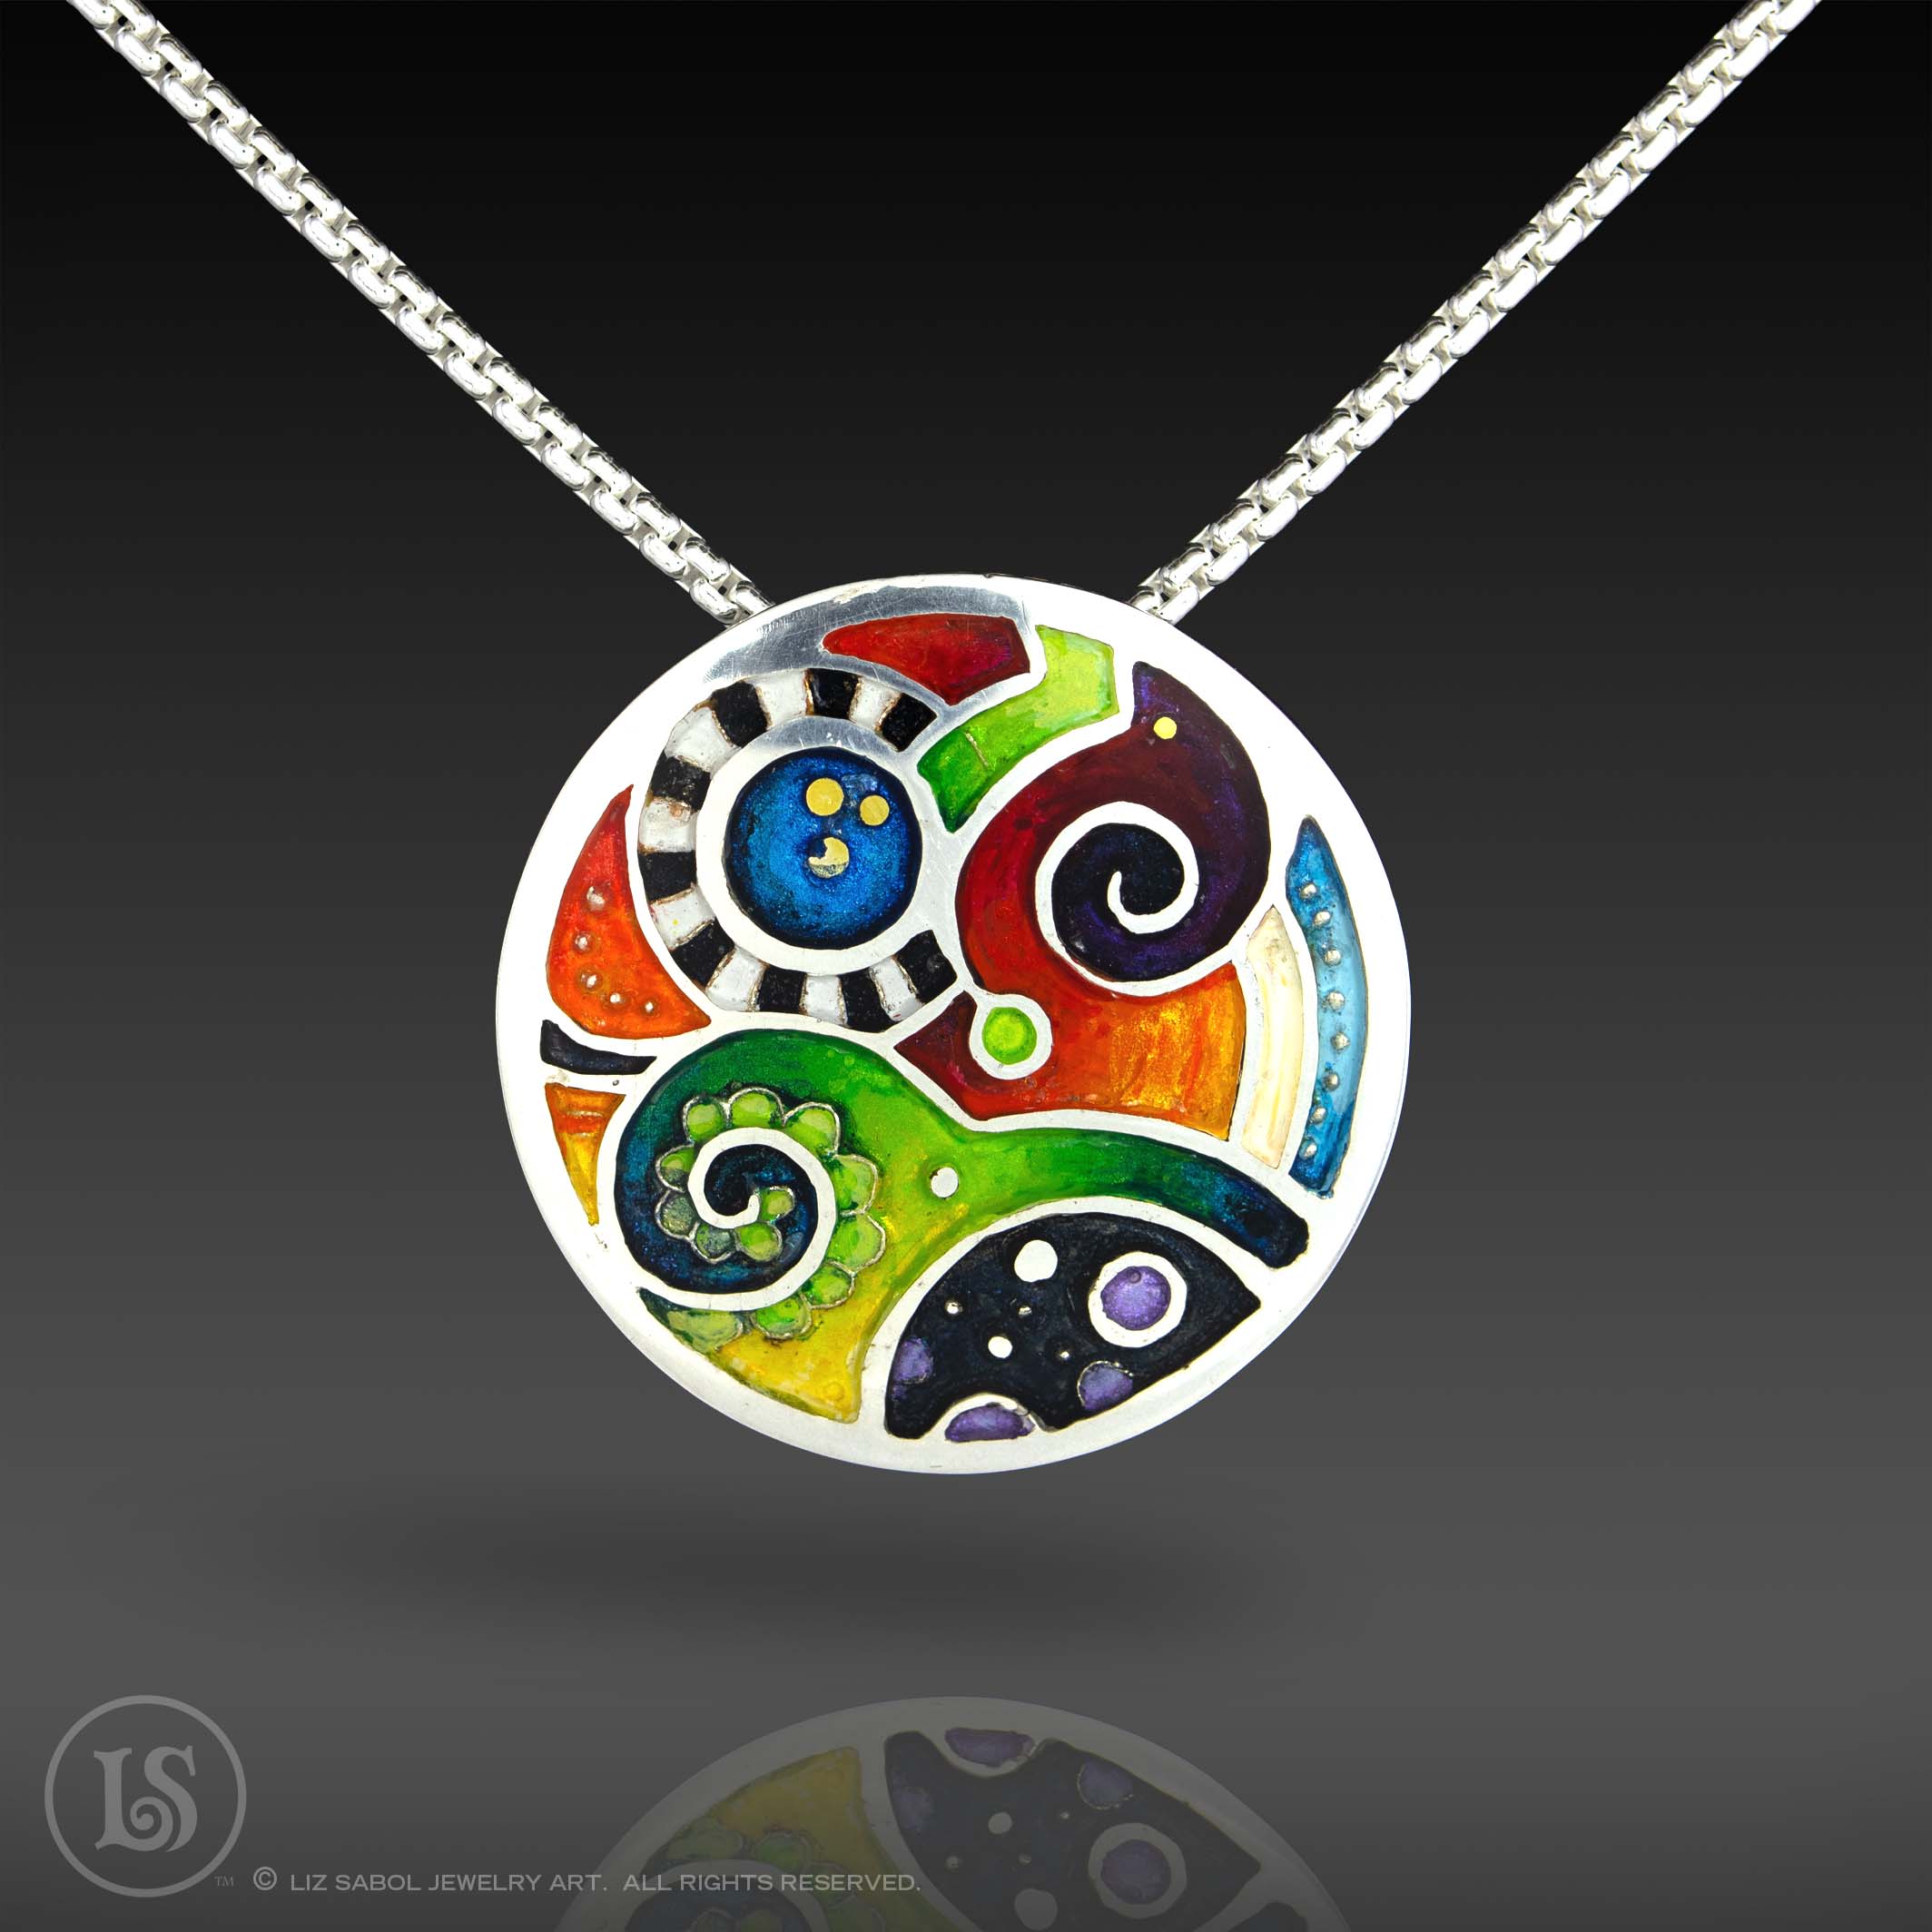 Paisley Moon Revisted Pendant, 950 Sterling Silver, 22K gold accent